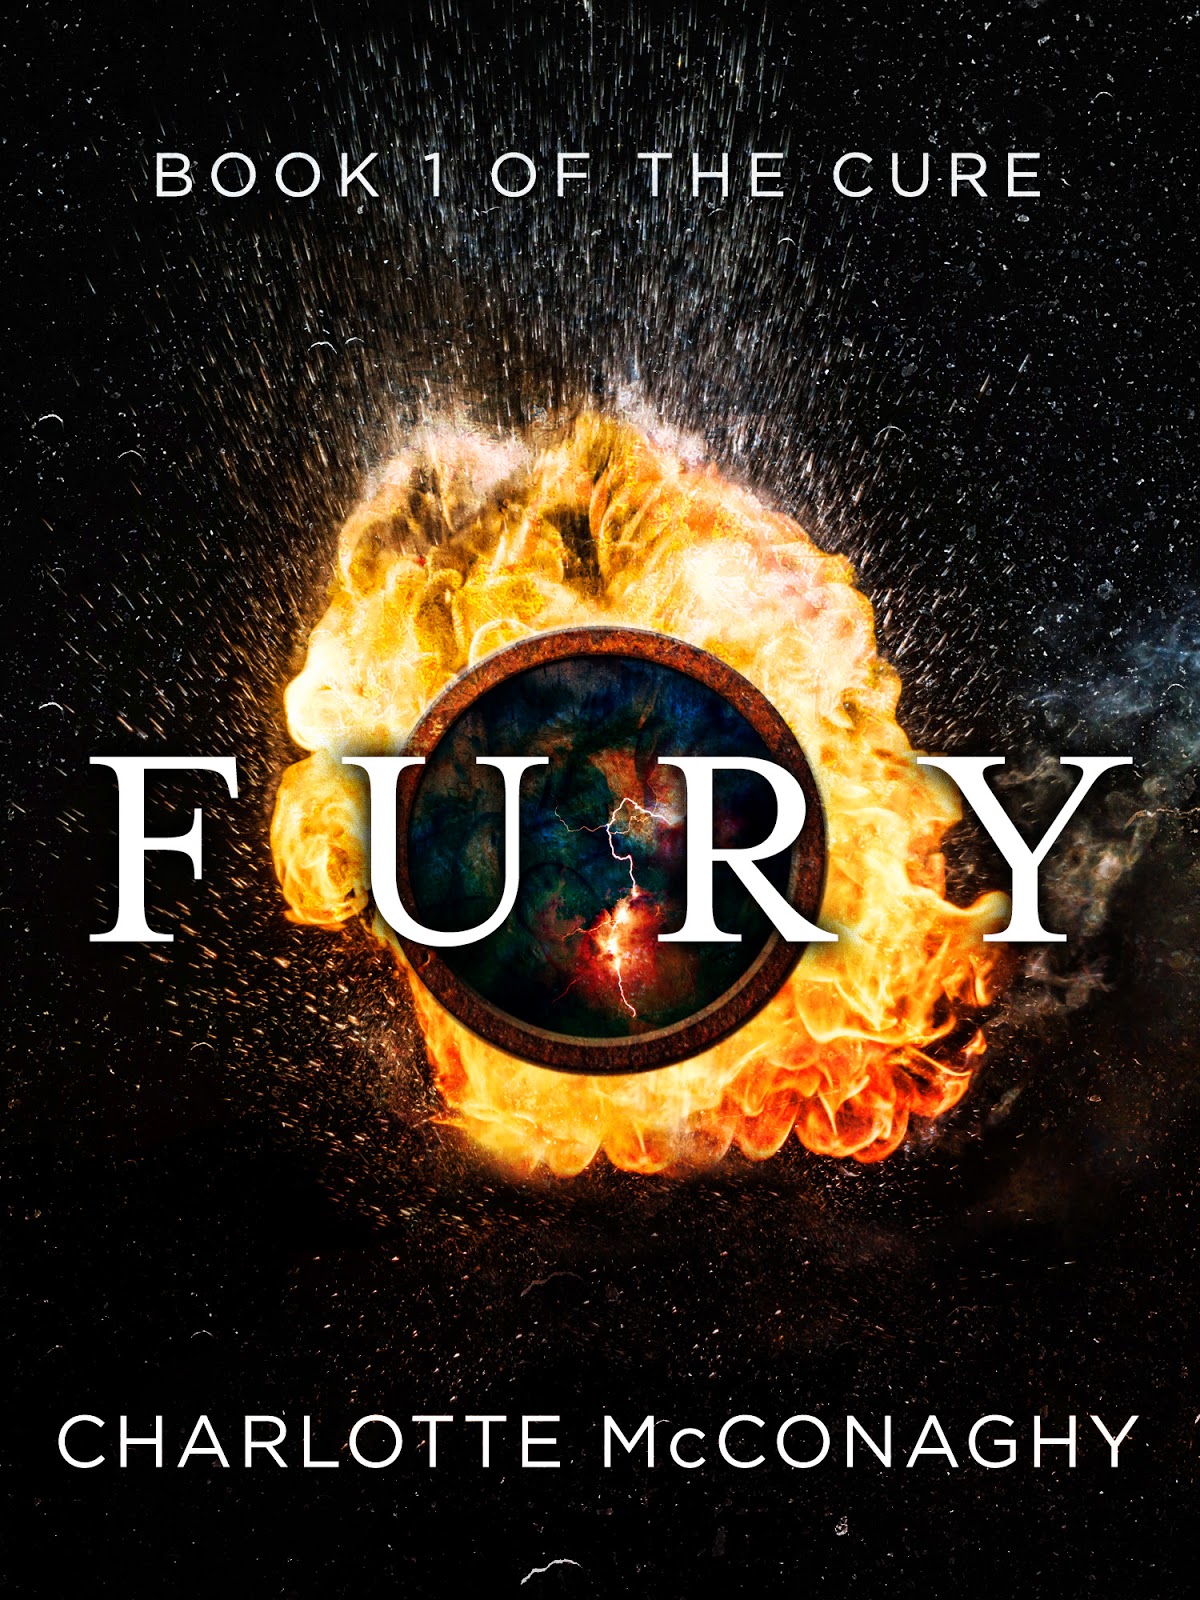 CBY Book Club: Blog Tour Interview & Giveaway - Fury by Charlotte McConaghy1200 x 1600